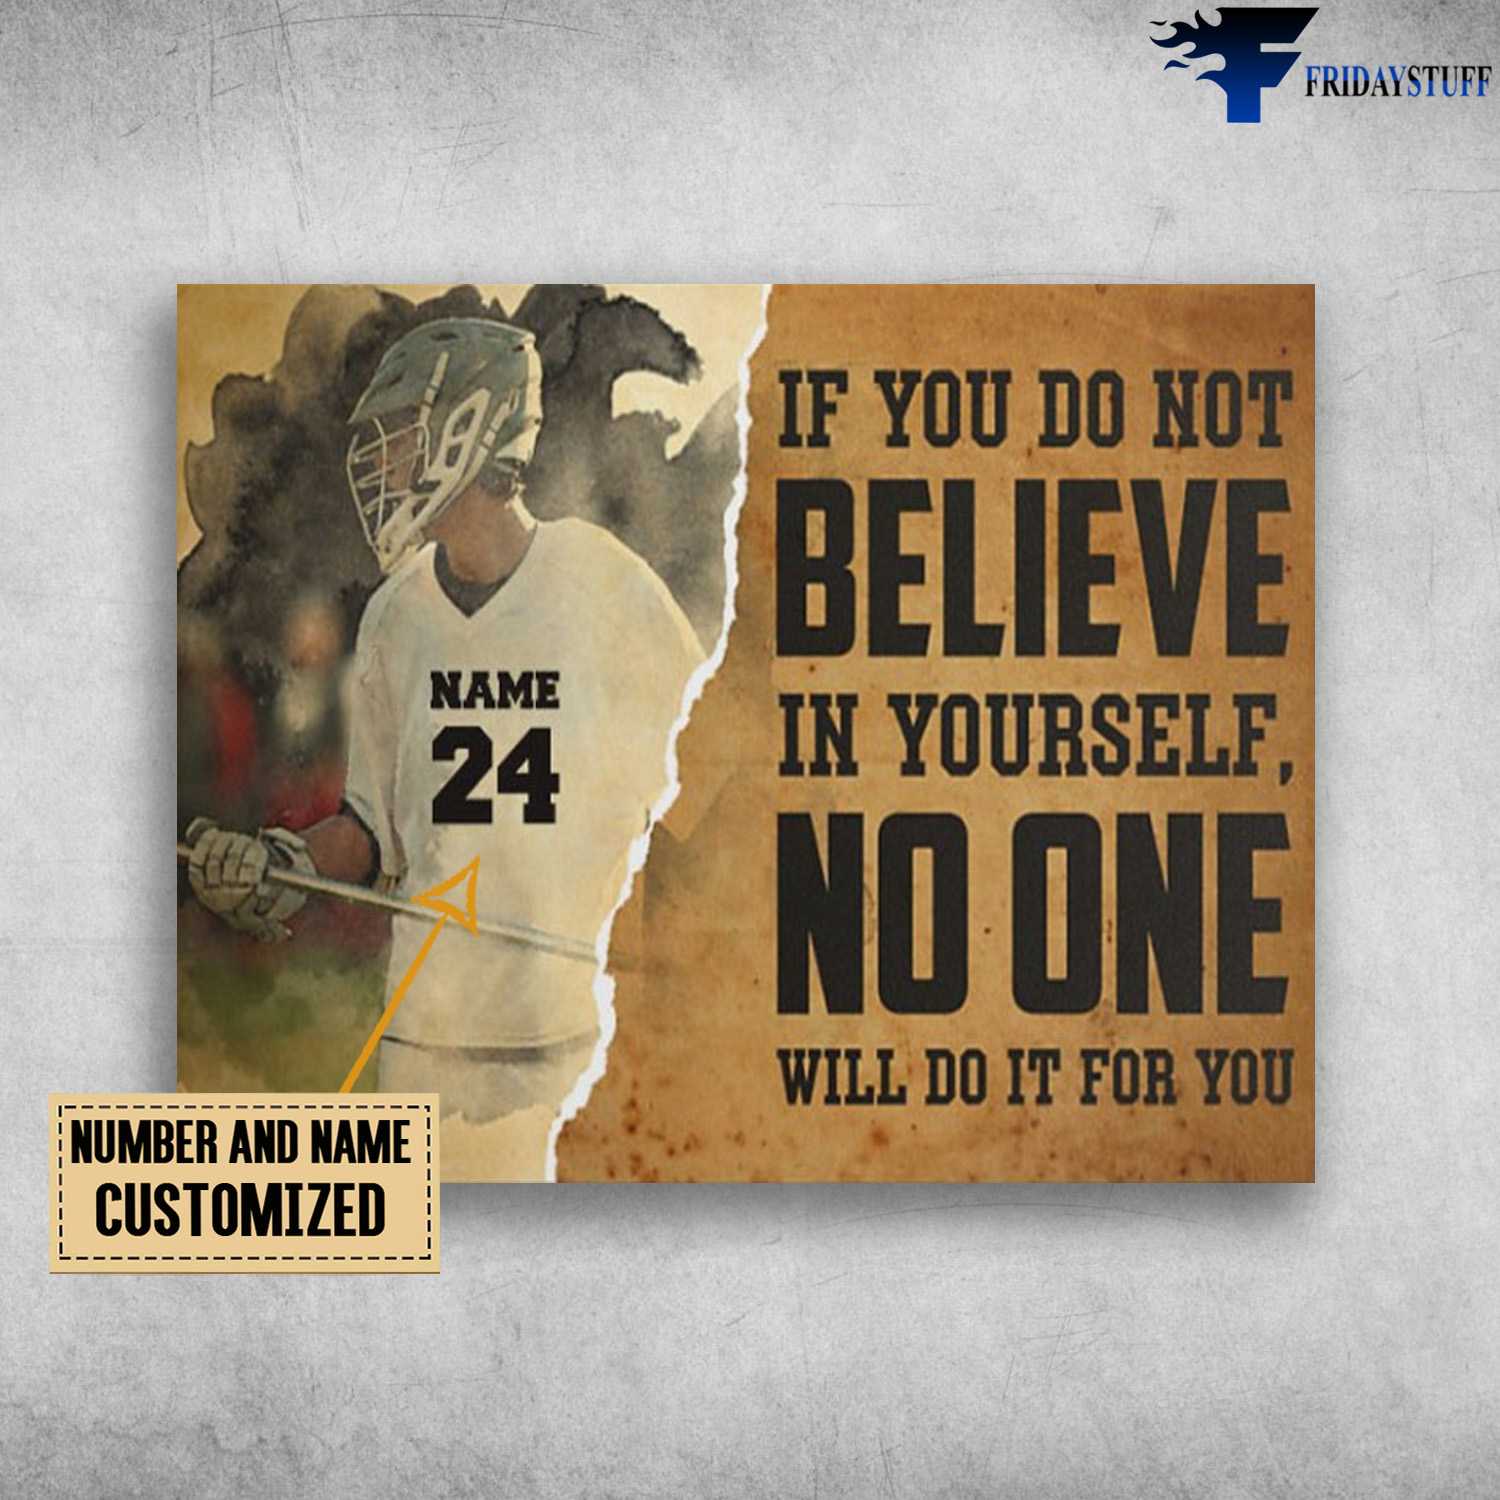 Hockey Man, Hockey Poster, If You Do Not Believe In Yourself, No One Will Do It For You